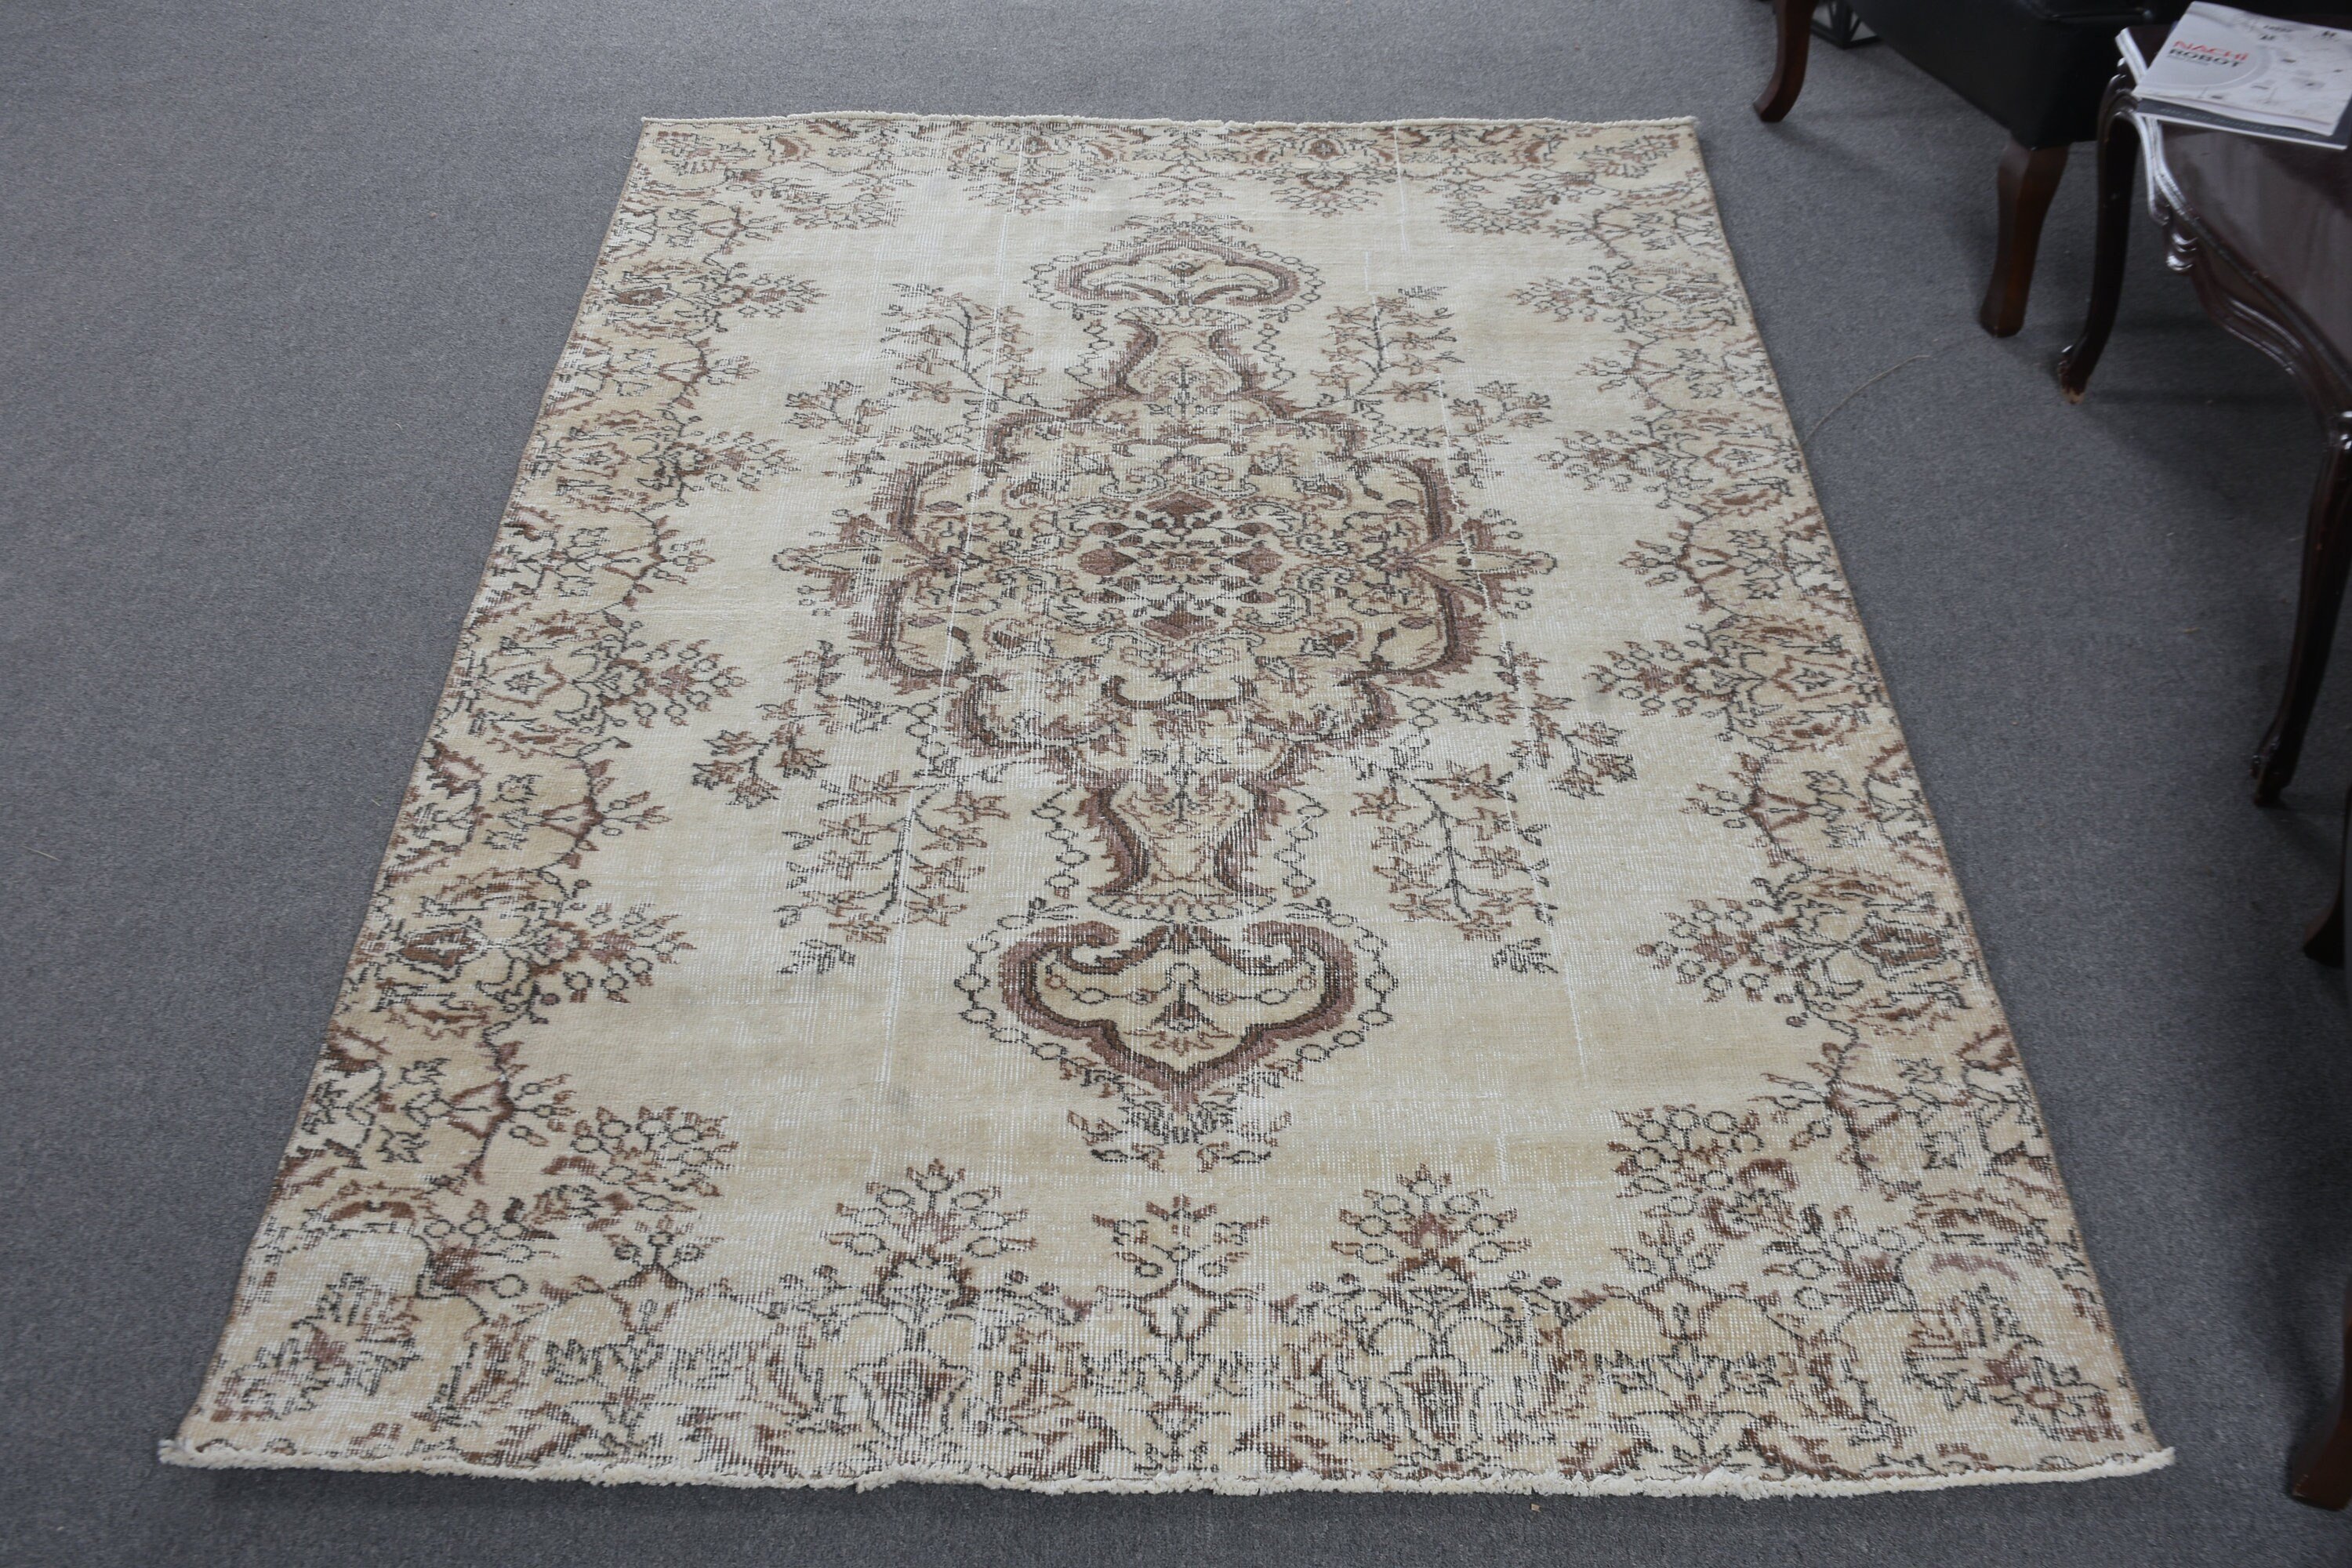 4.9x8.1 ft Area Rug, Living Room Rug, Rugs for Kitchen, Home Decor Rug, Vintage Rugs, Turkish Rugs, Brown Floor Rugs, Old Rug